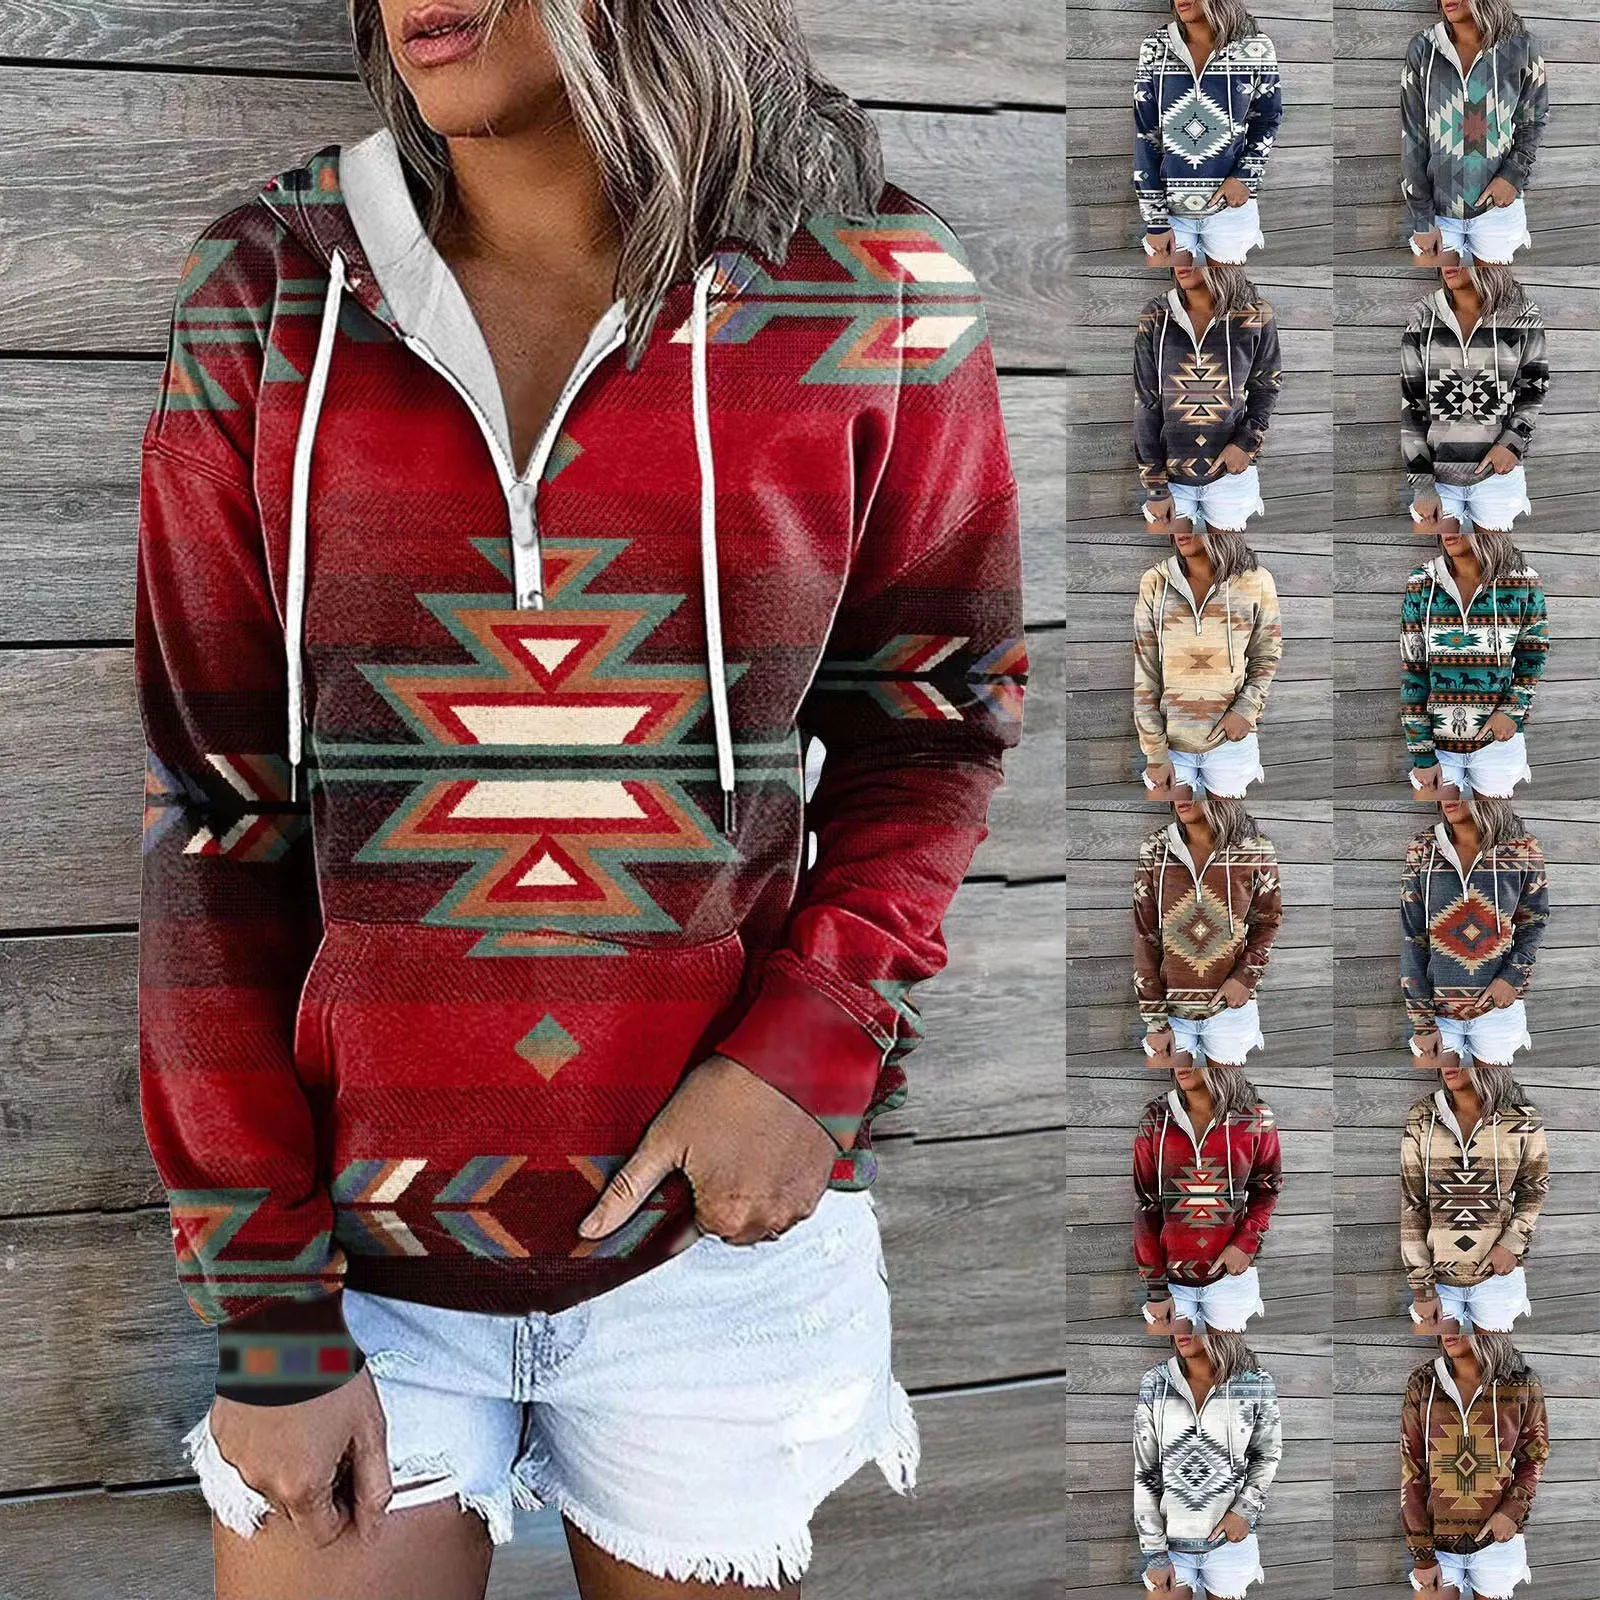 Hot Selling Women's Clothing Autumn And Winter New Ethnic Tribal Hooded Sweater Coat Women Outwear Top